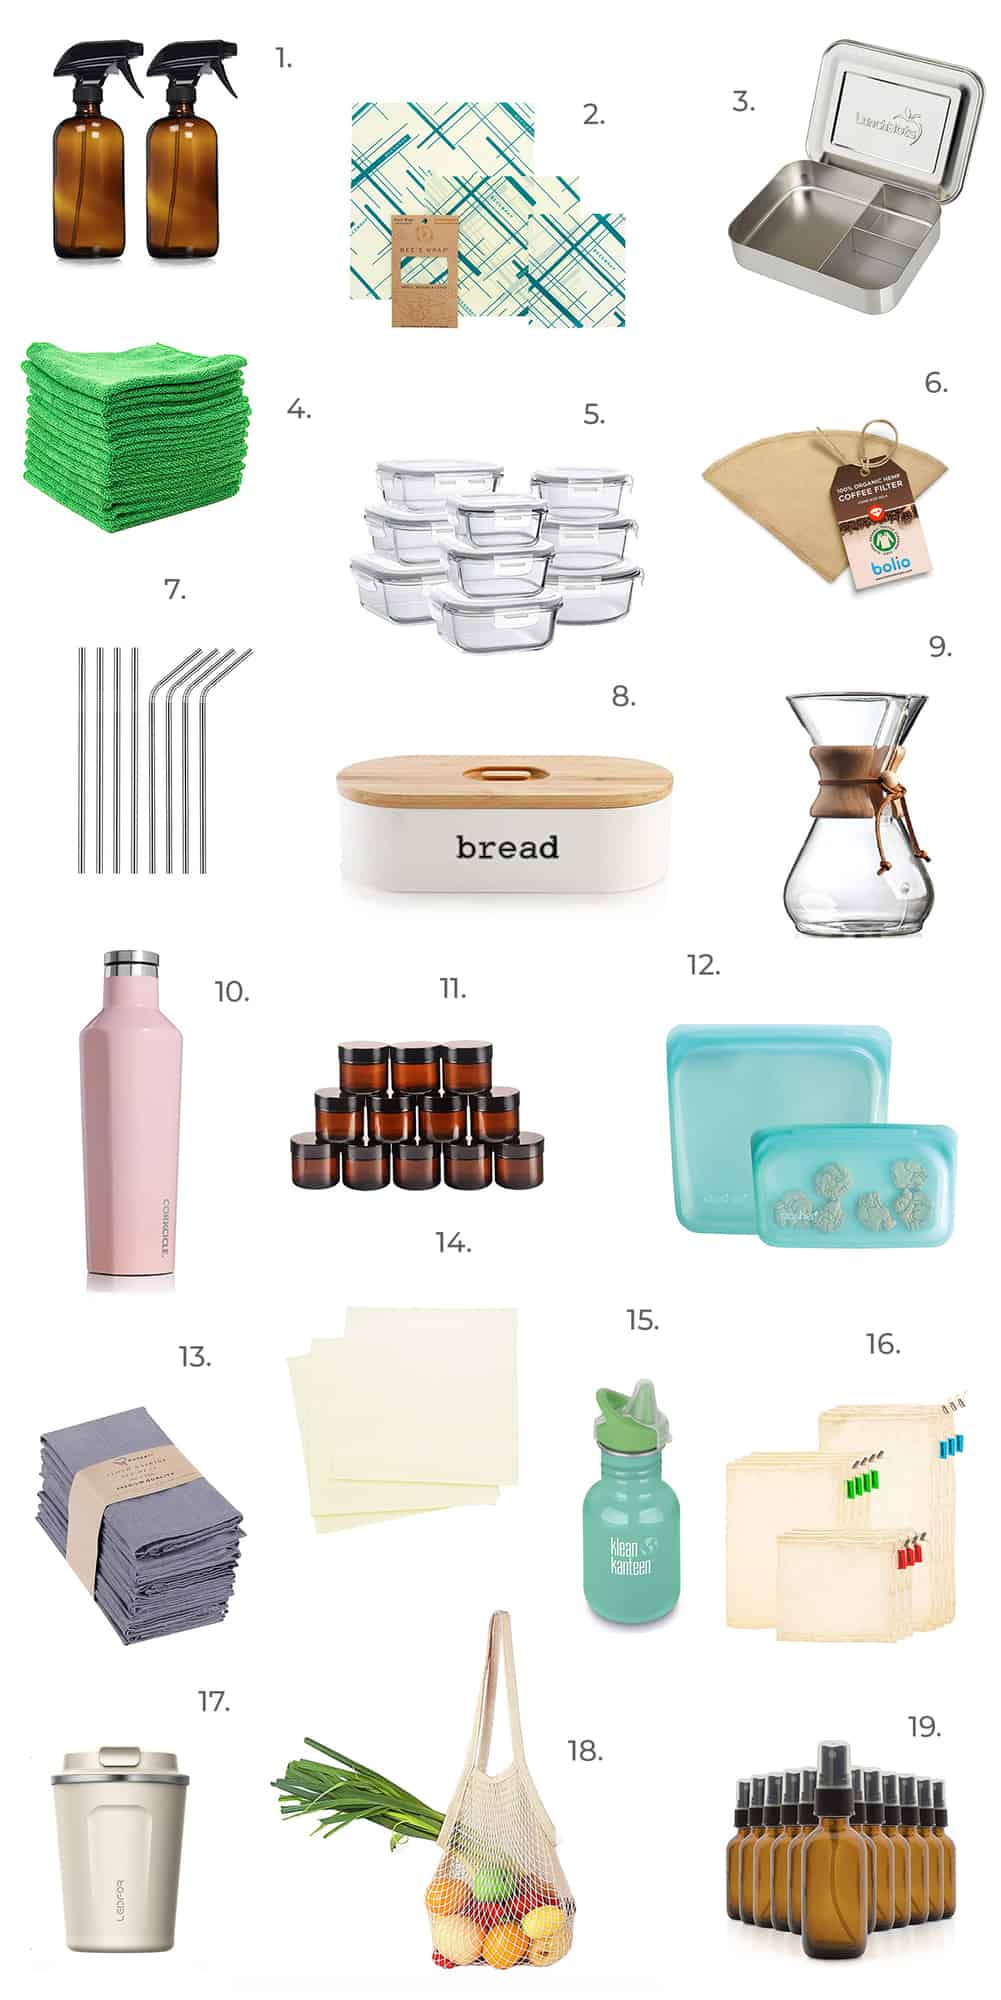 10 Best Useful Household Items